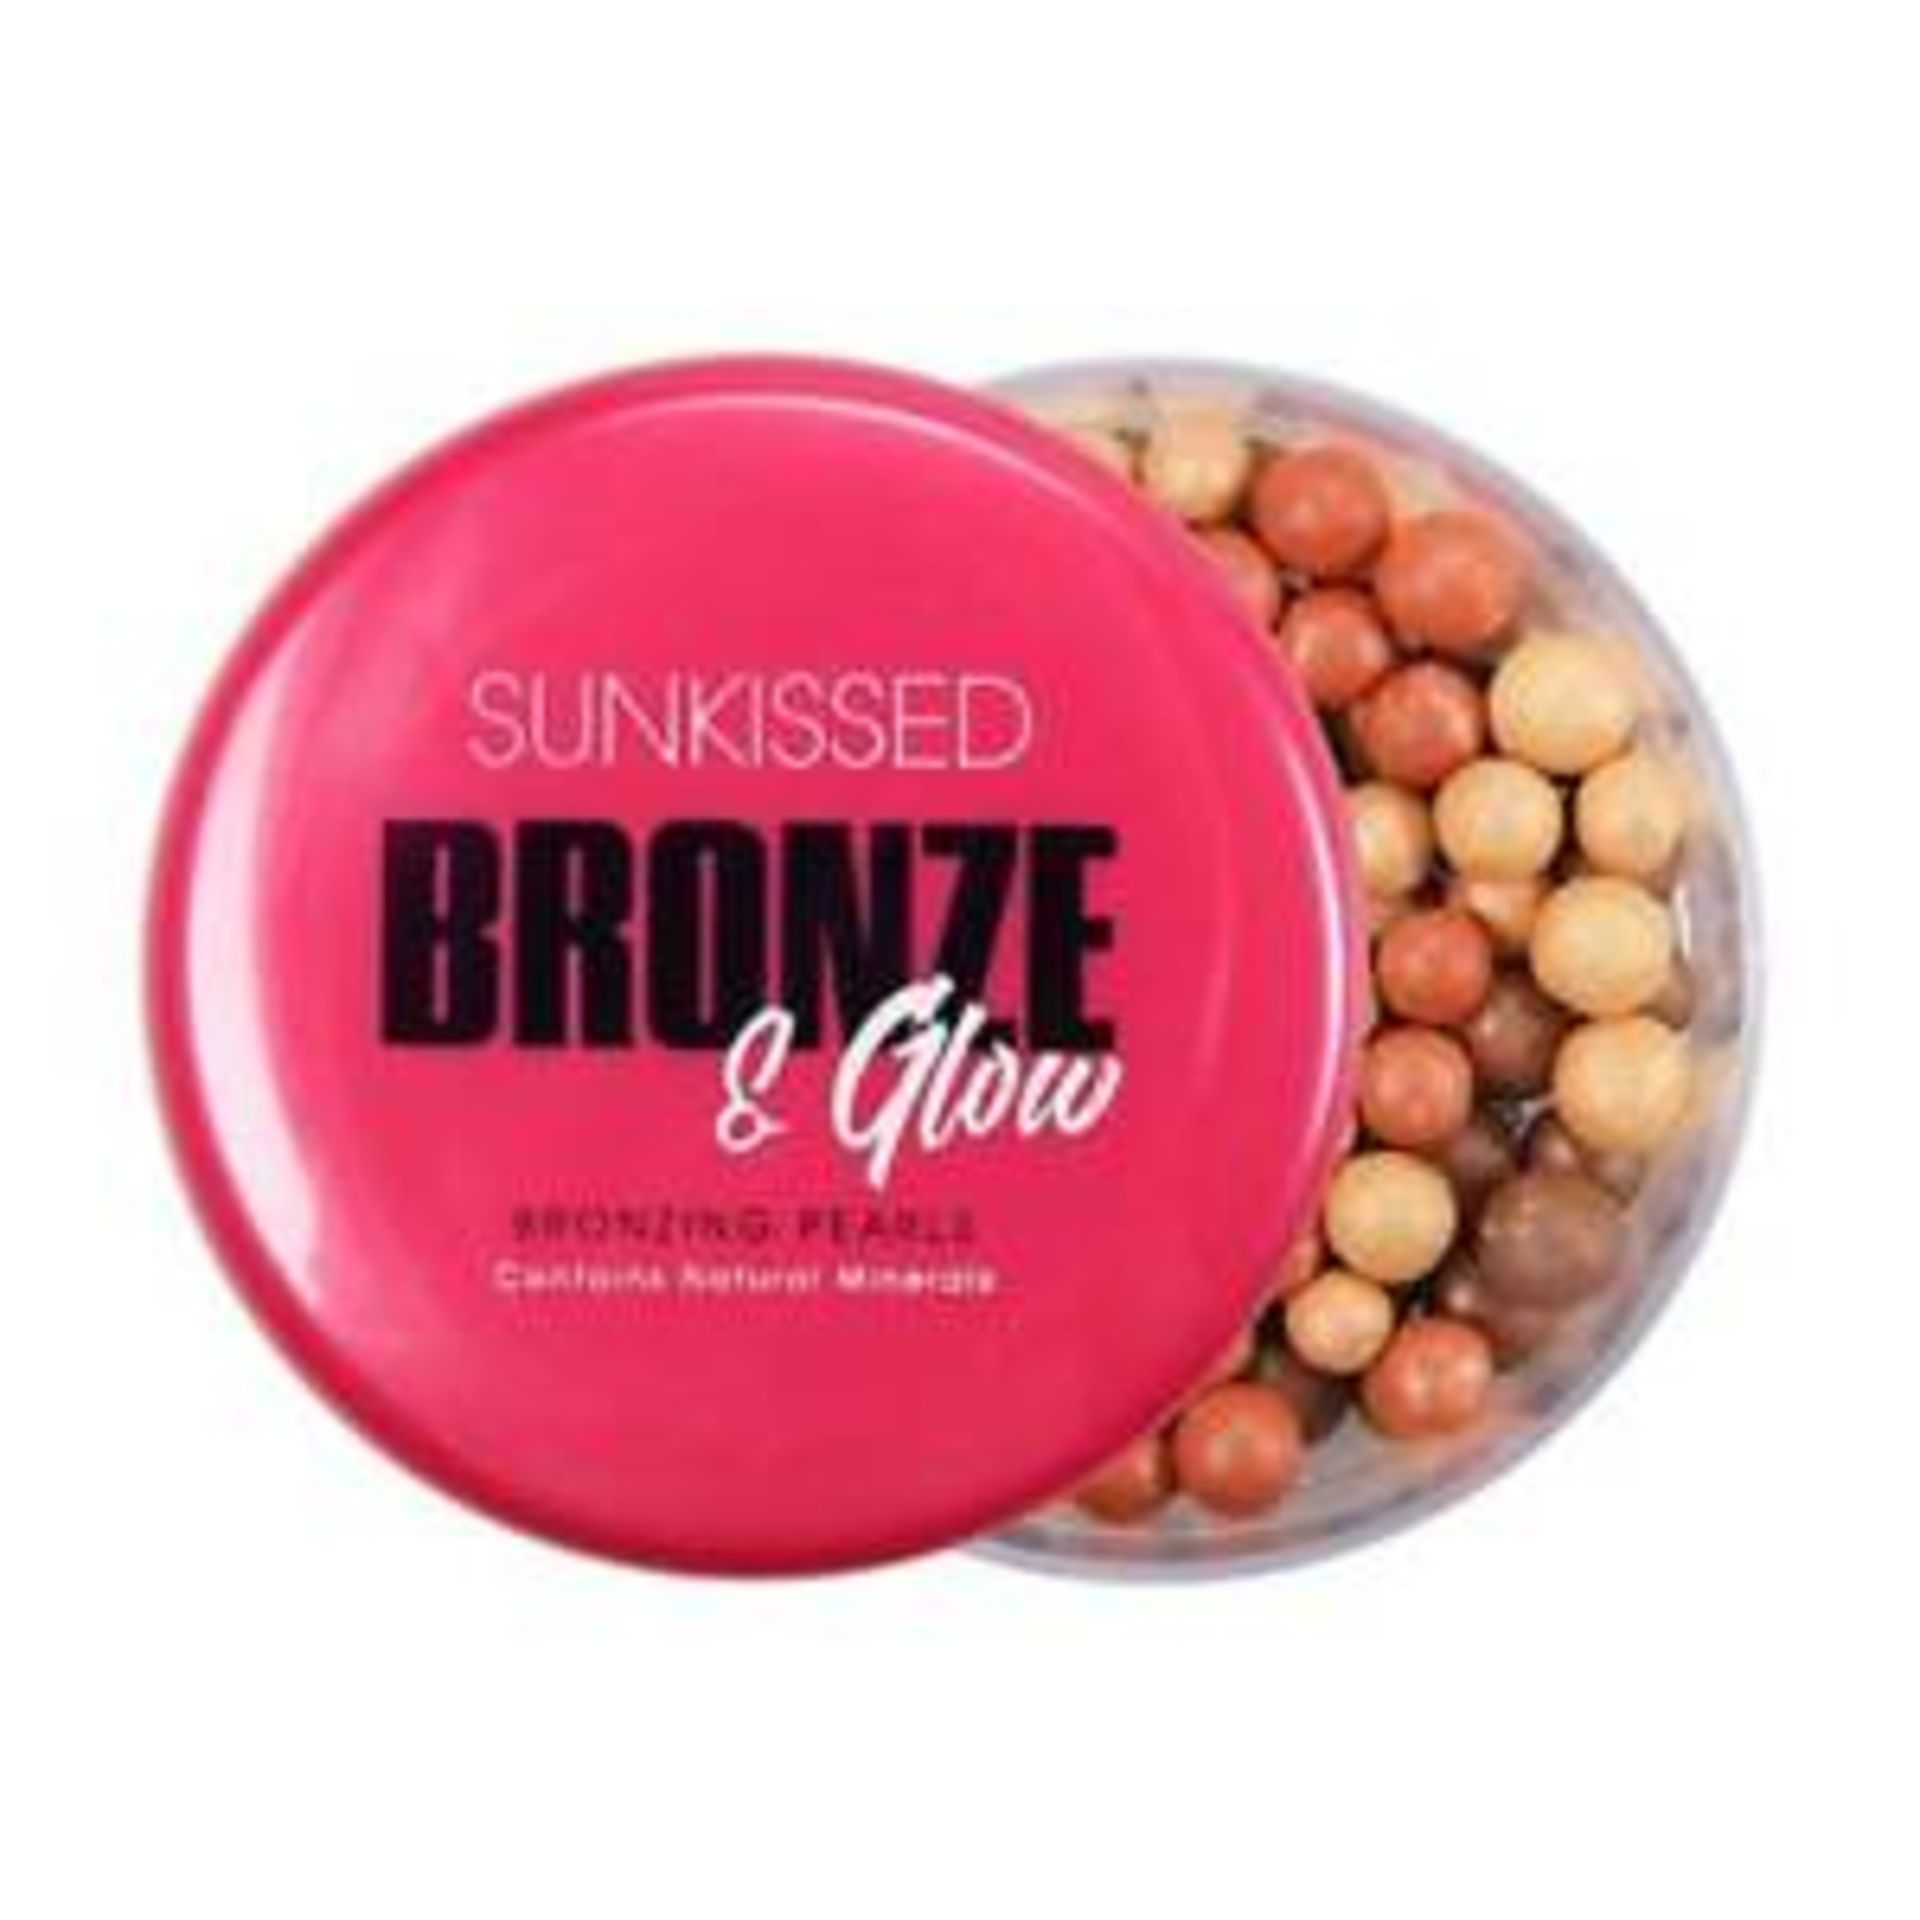 V Brand New Sunkissed Bronze and Glow Bronzing Pearls 45g